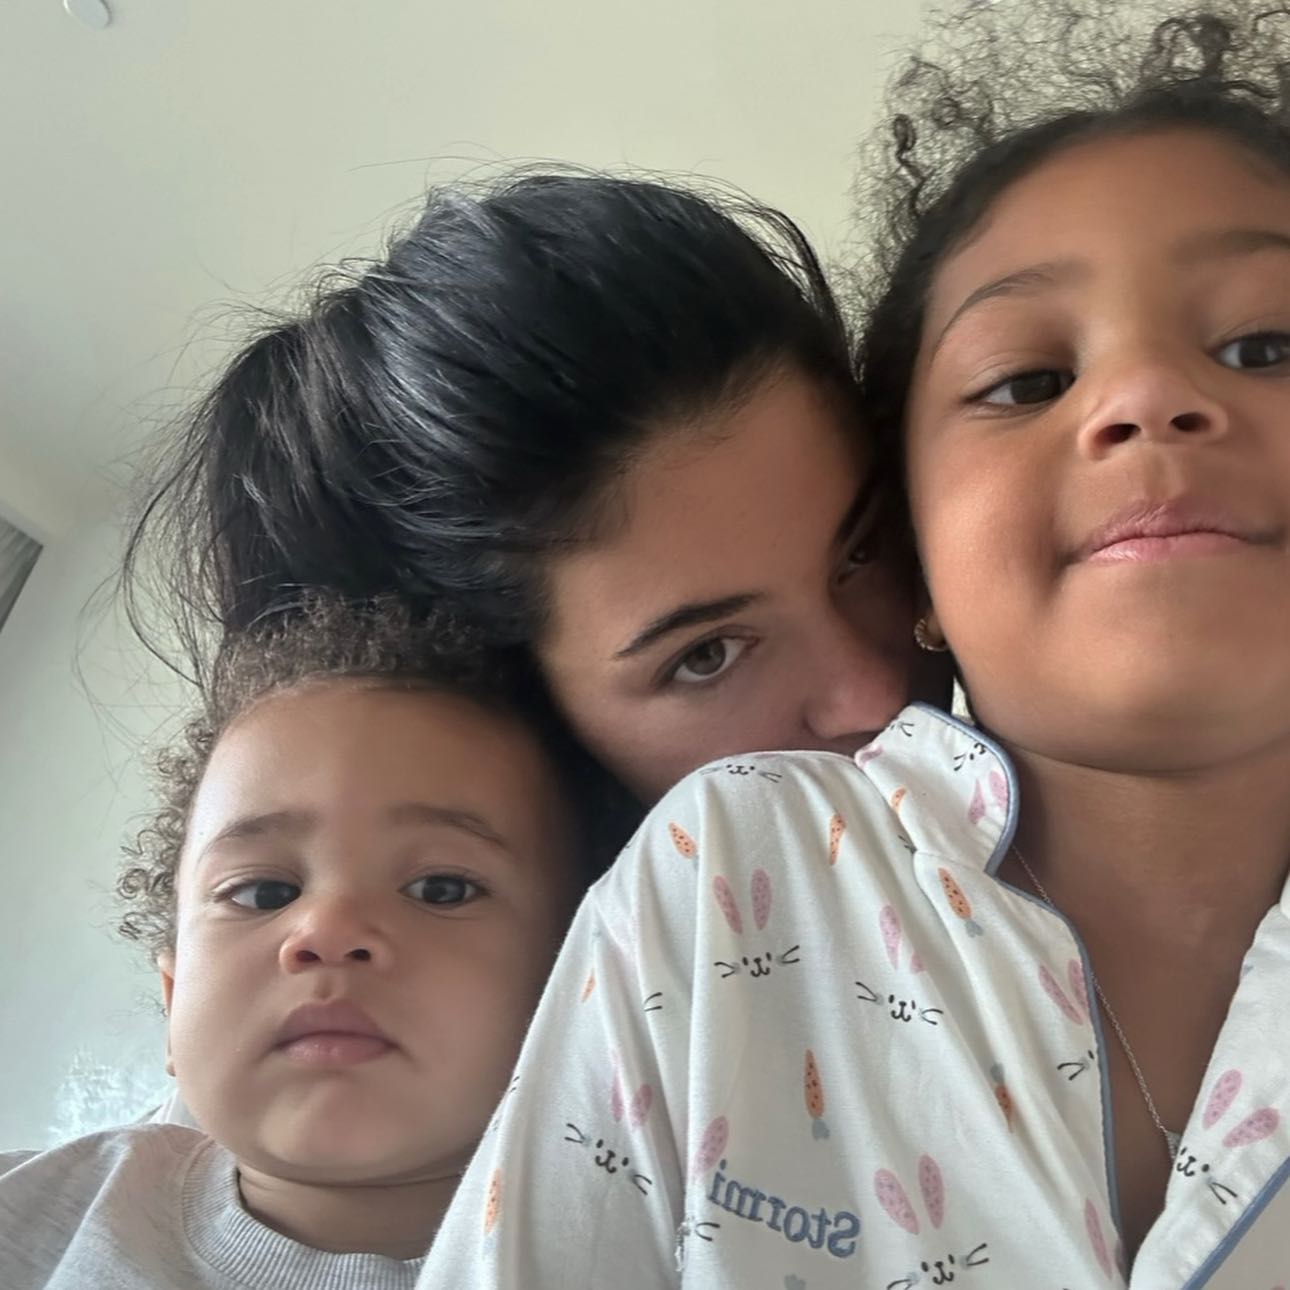 Kardashian critics claimed that Kylie can have productive mornings because she has nannies helping out with her kids - though they were excluded from the TikTok